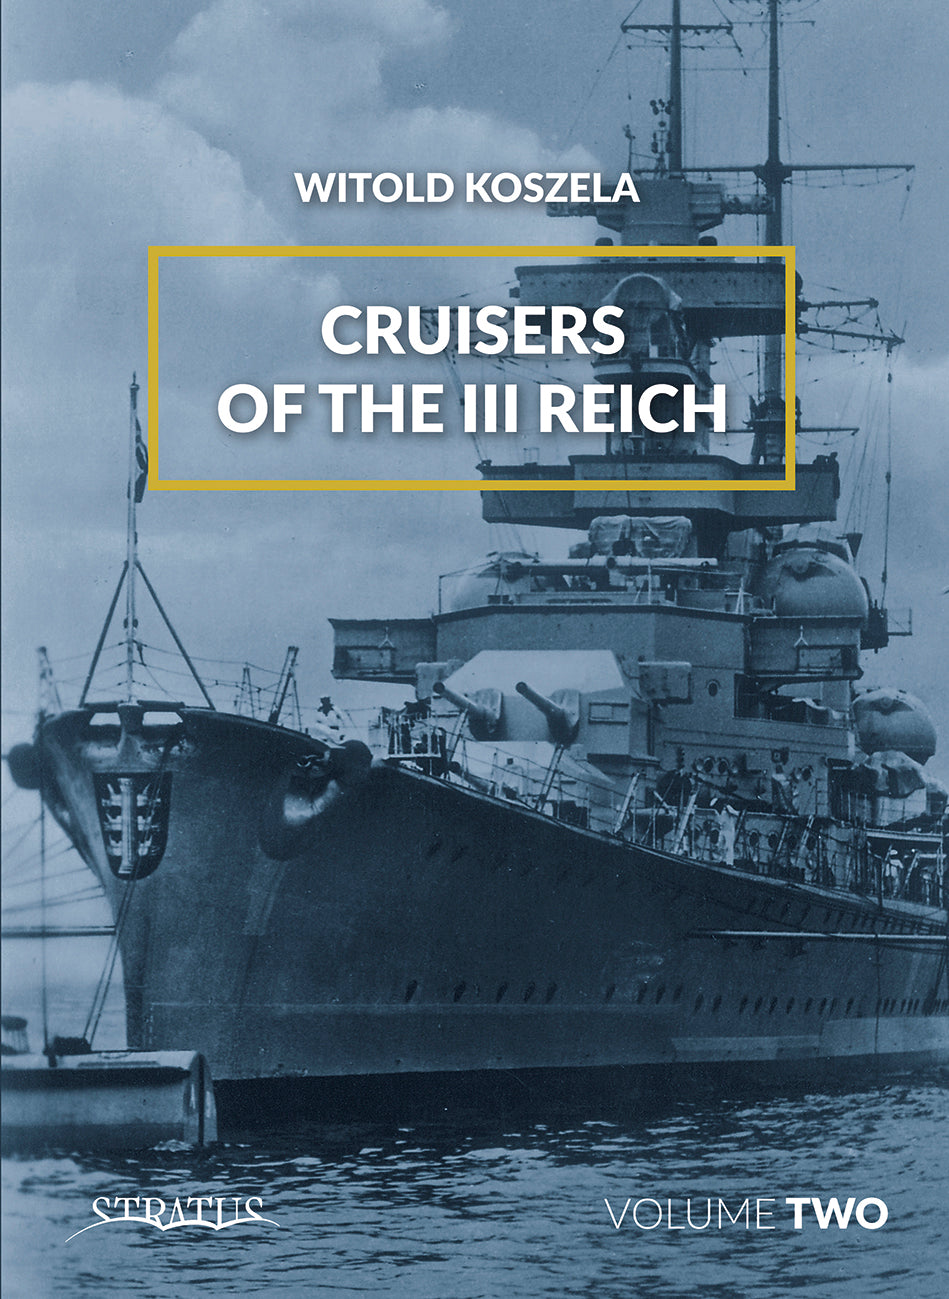 Cruisers of the III Reich